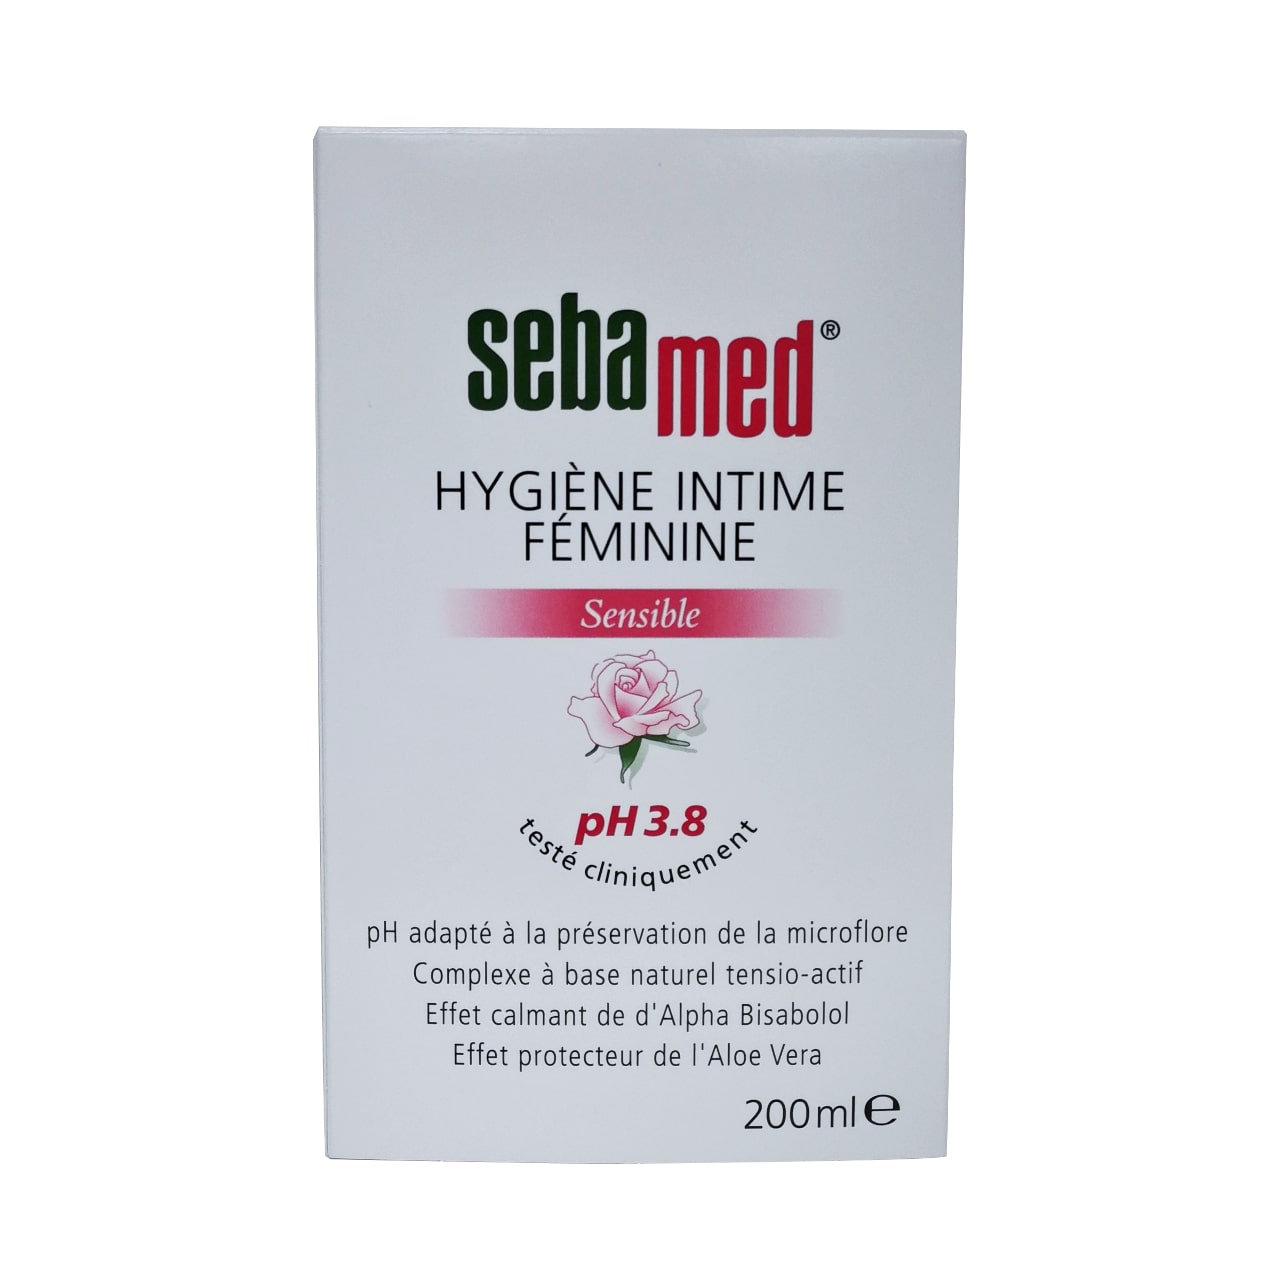 Product label for Sebamed Feminine Intimate Wash pH 3.8 in French